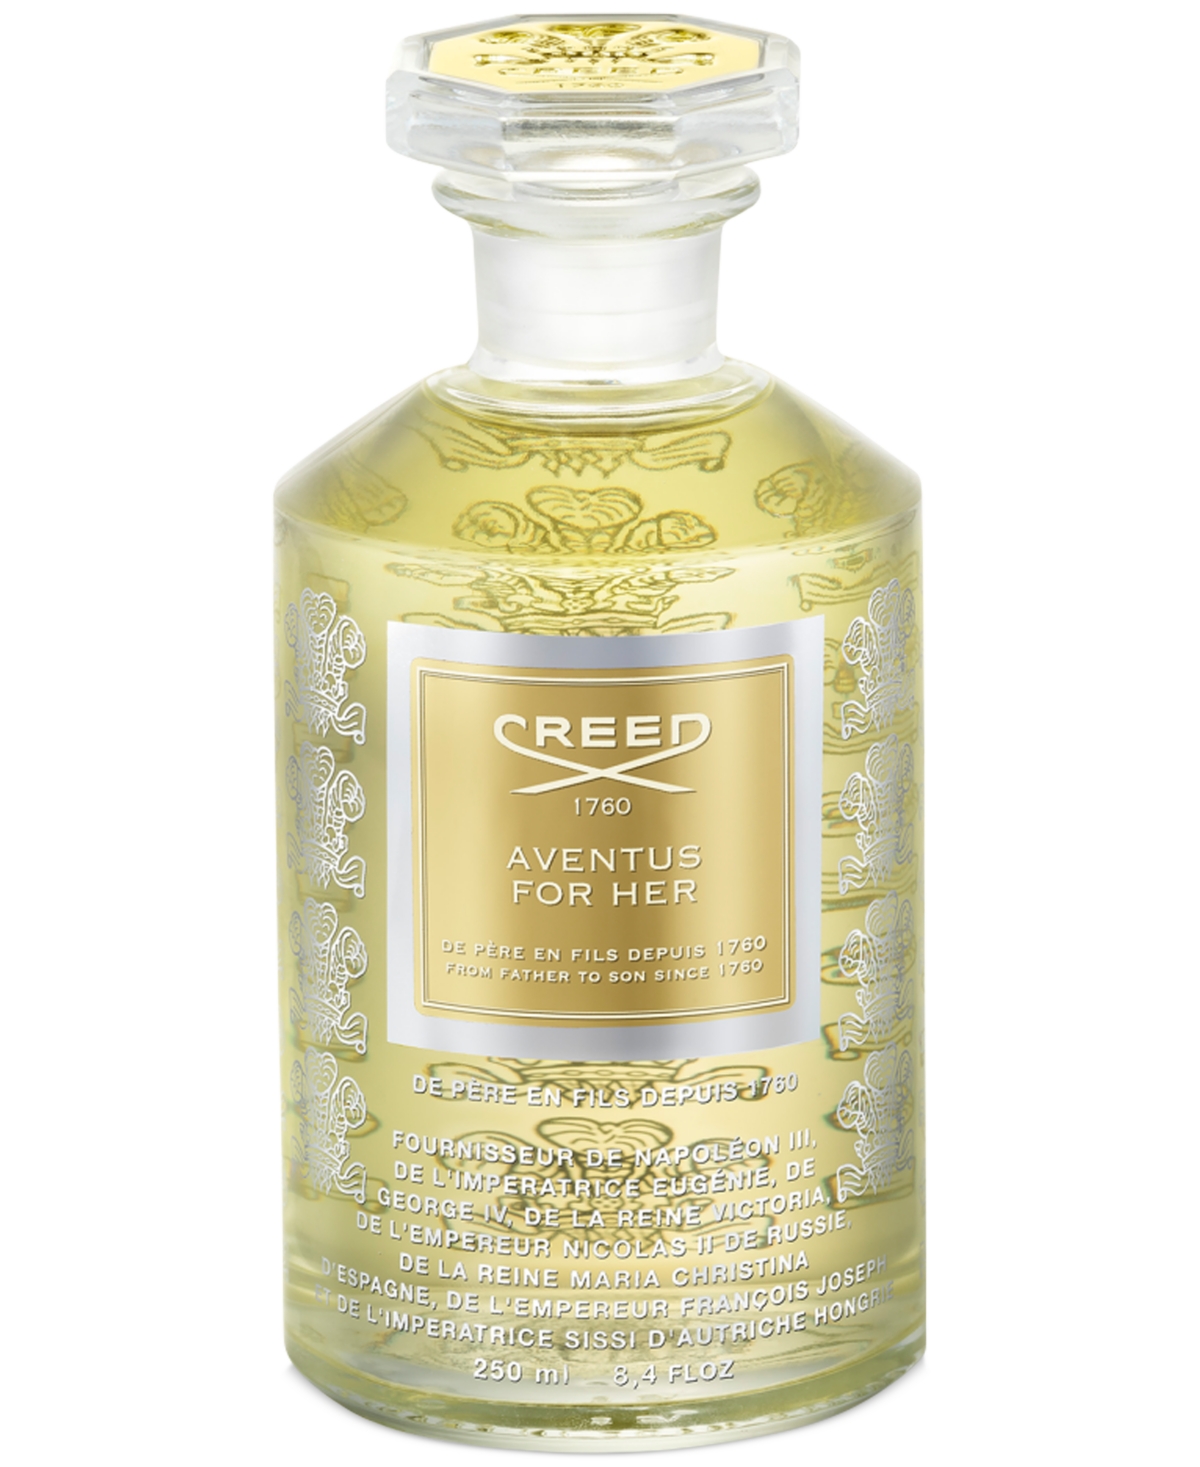 Creed Aventus For Her, 8.4 Oz.